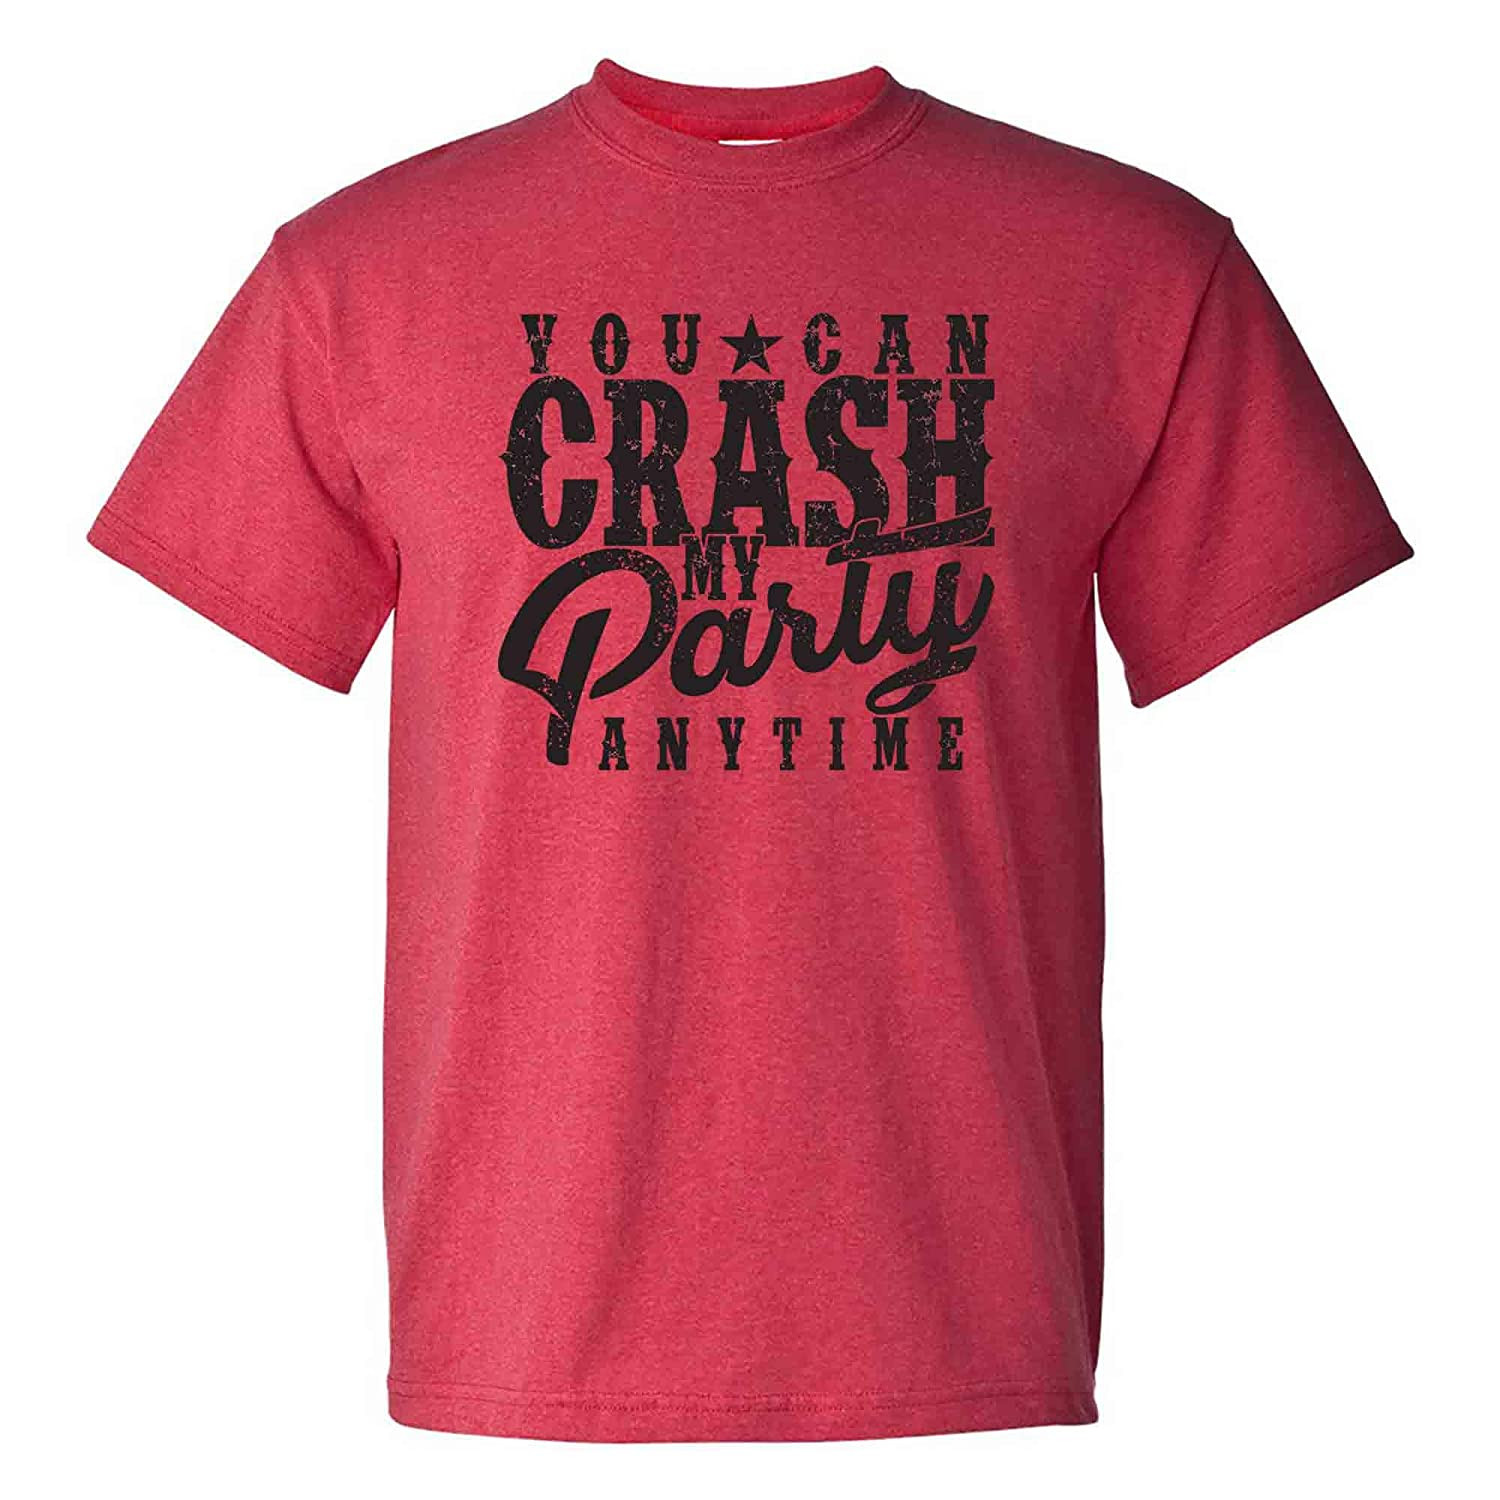 Baby You Can Crash My Party Anytime
 Ugp Campus Apparel You Can Crash My Party Anytime Funny